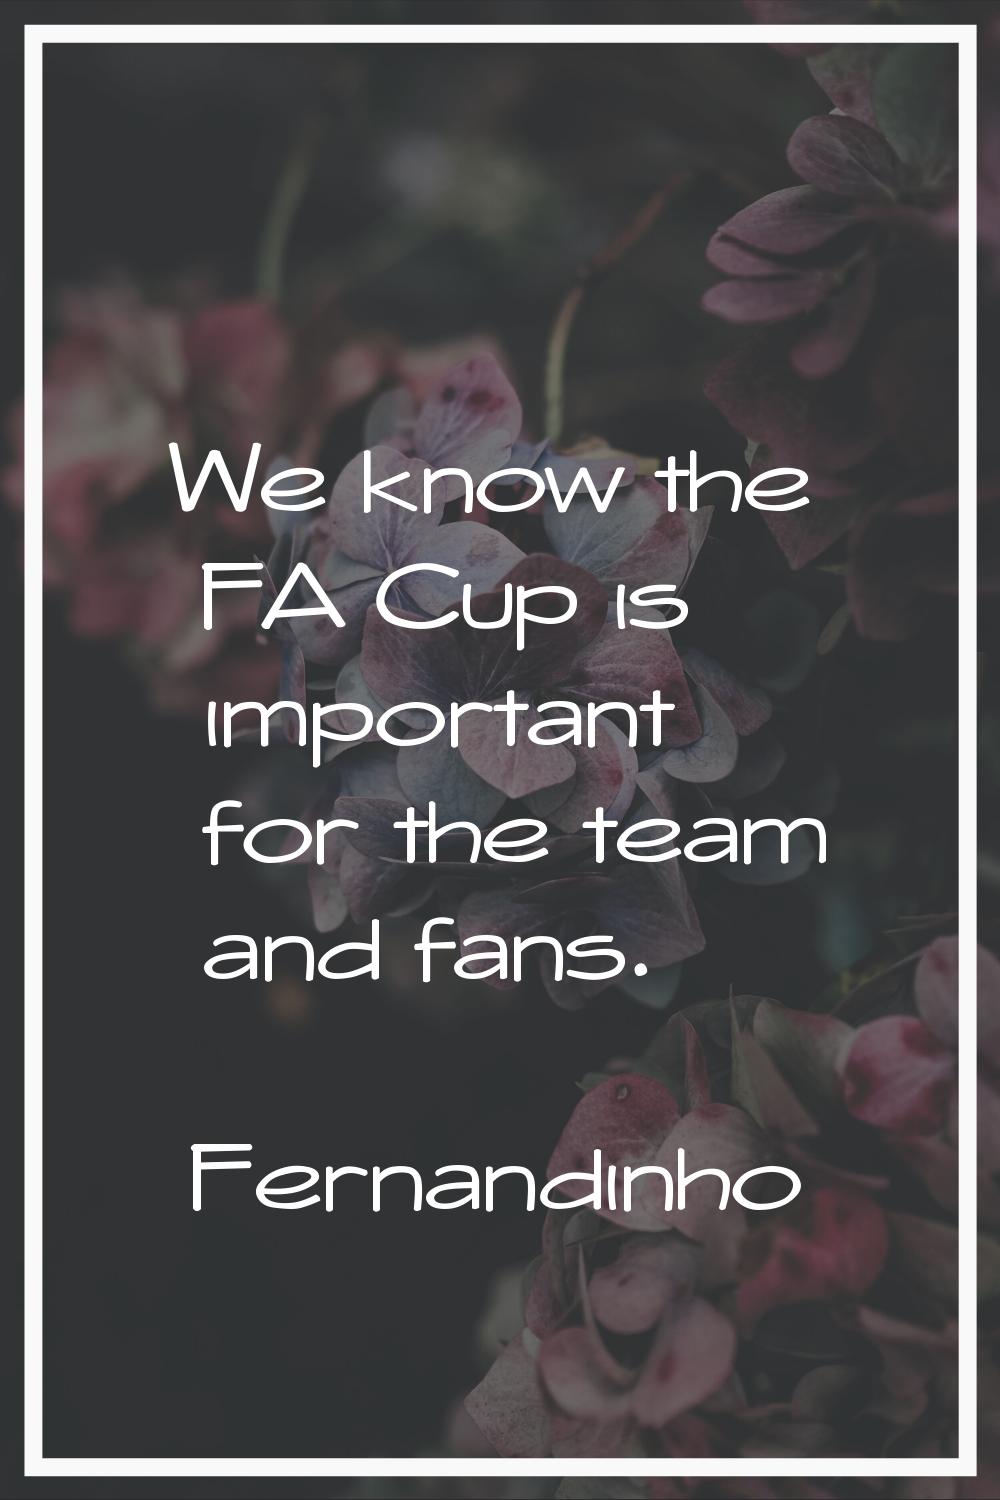 We know the FA Cup is important for the team and fans.